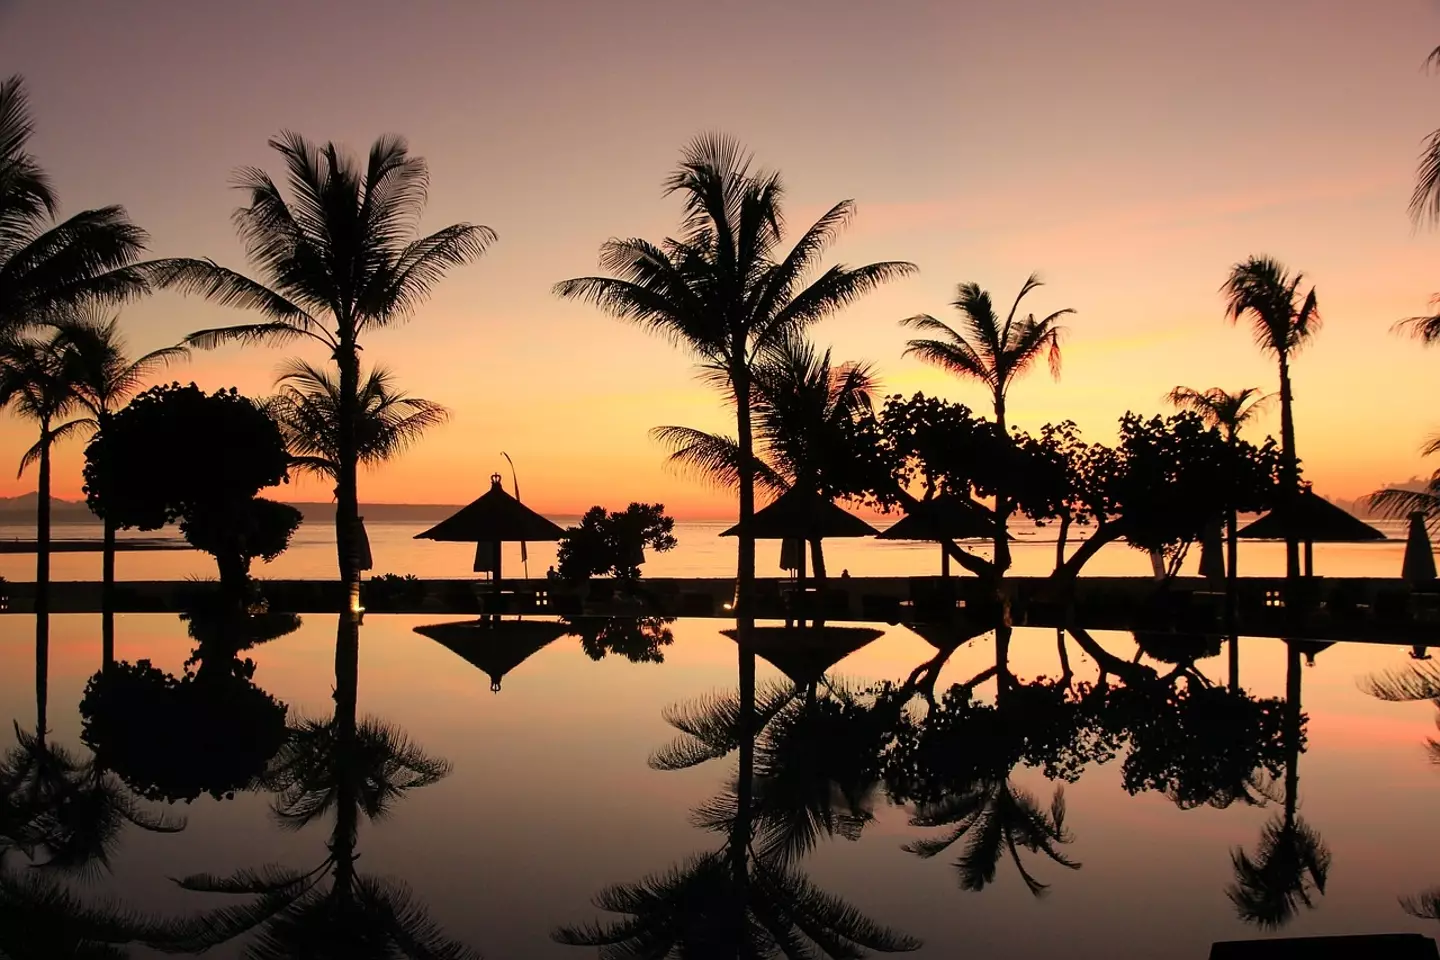 With a wedding location as luxurious as Bali, it's no surprise that it came with a hefty bill.